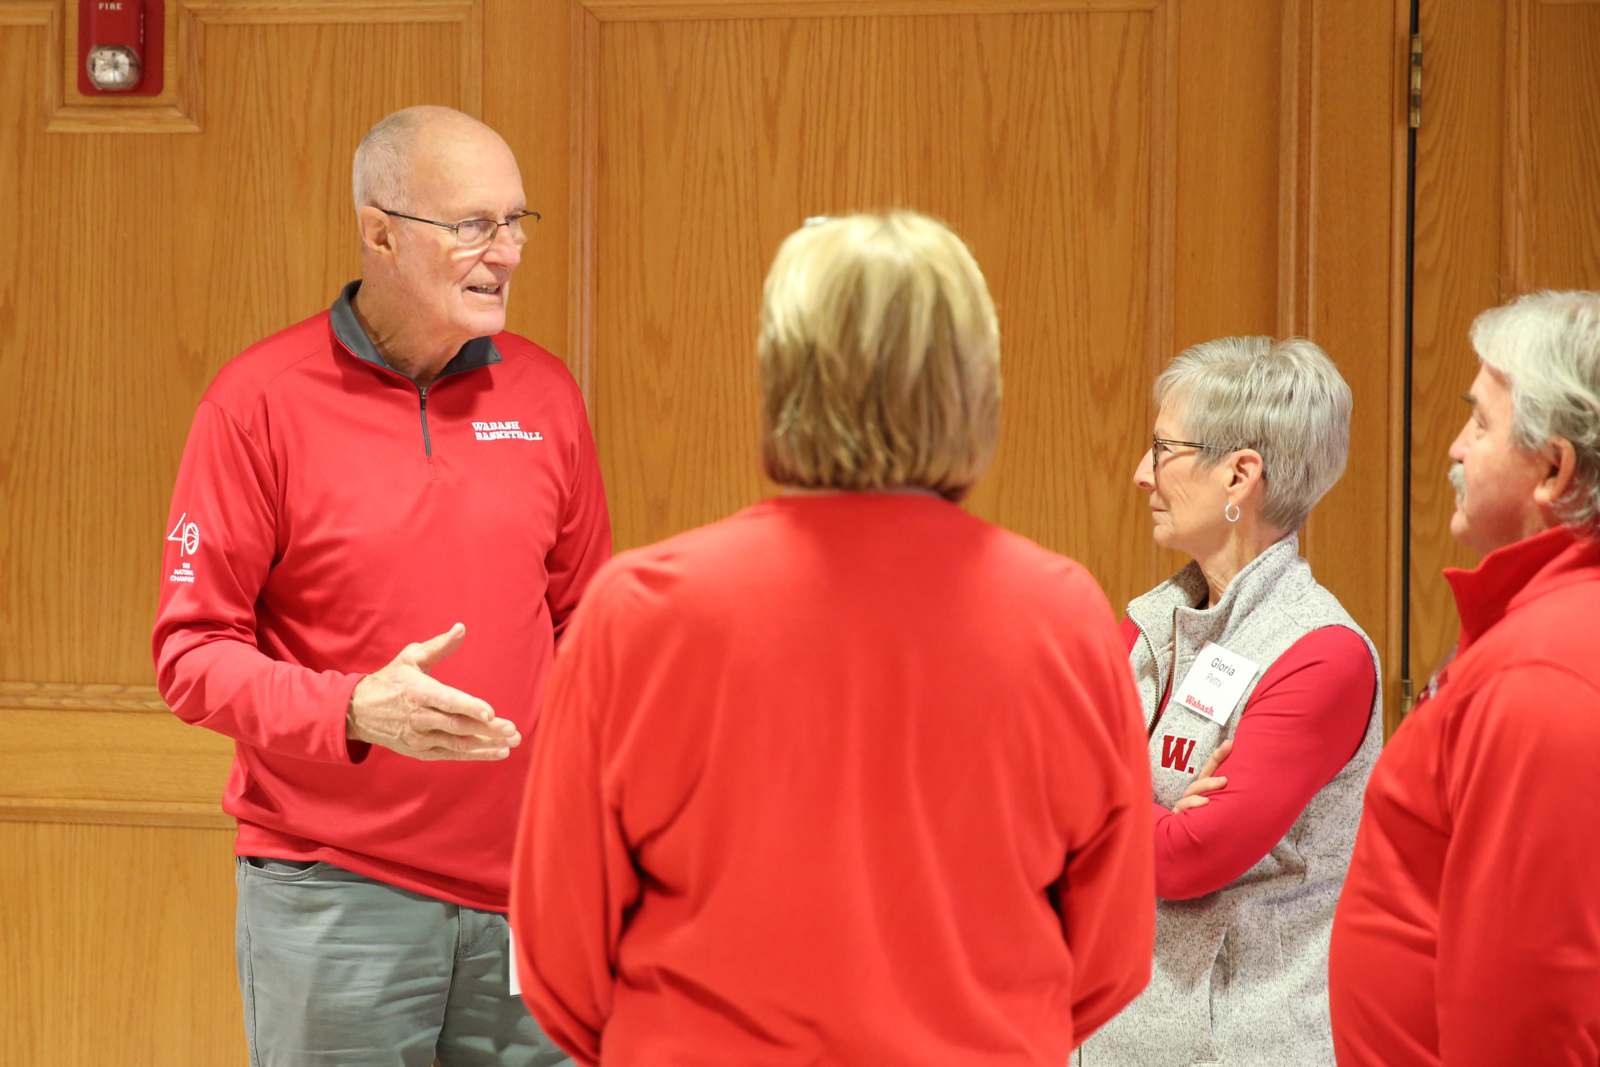 a man in red shirt talking to a group of people